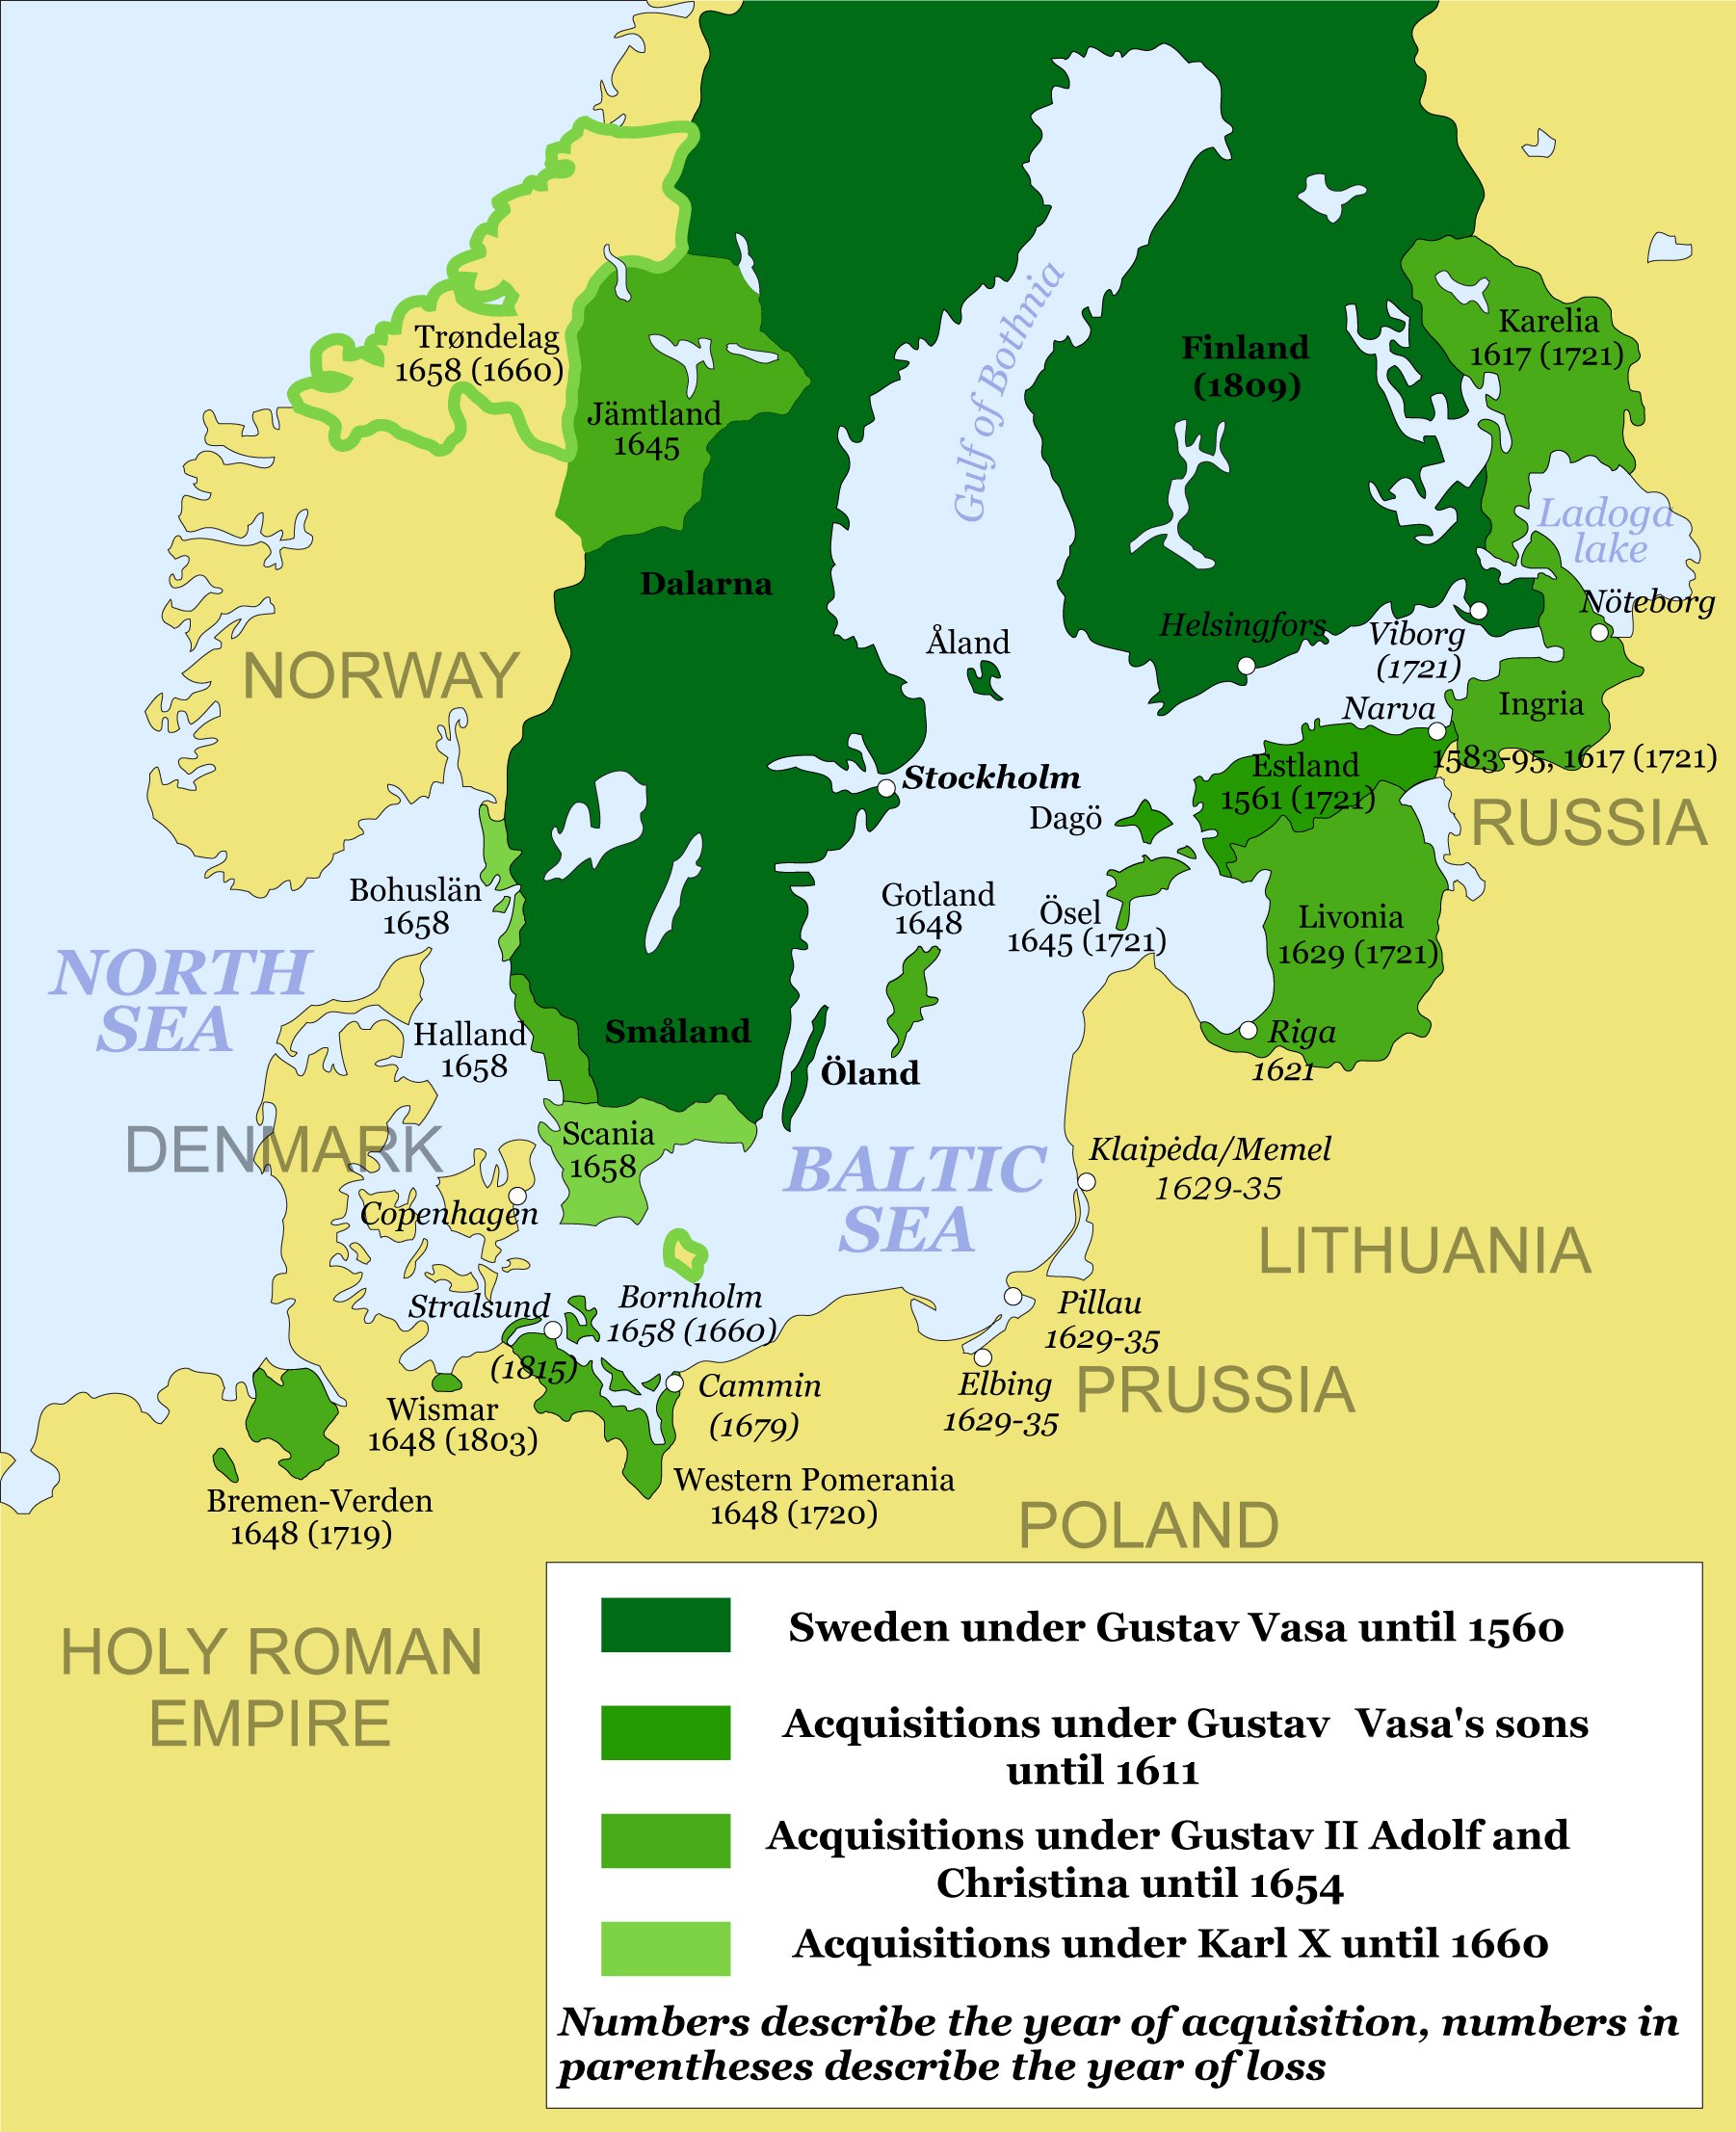 A historical map of the Baltic Sea region showing the expansion of Sweden under different rulers from 1560 to 1815. The map is color-coded to indicate the territories of Sweden and its neighbors, and has numbers to mark the year of acquisition. The map also has labels for cities, regions, and bodies of water.